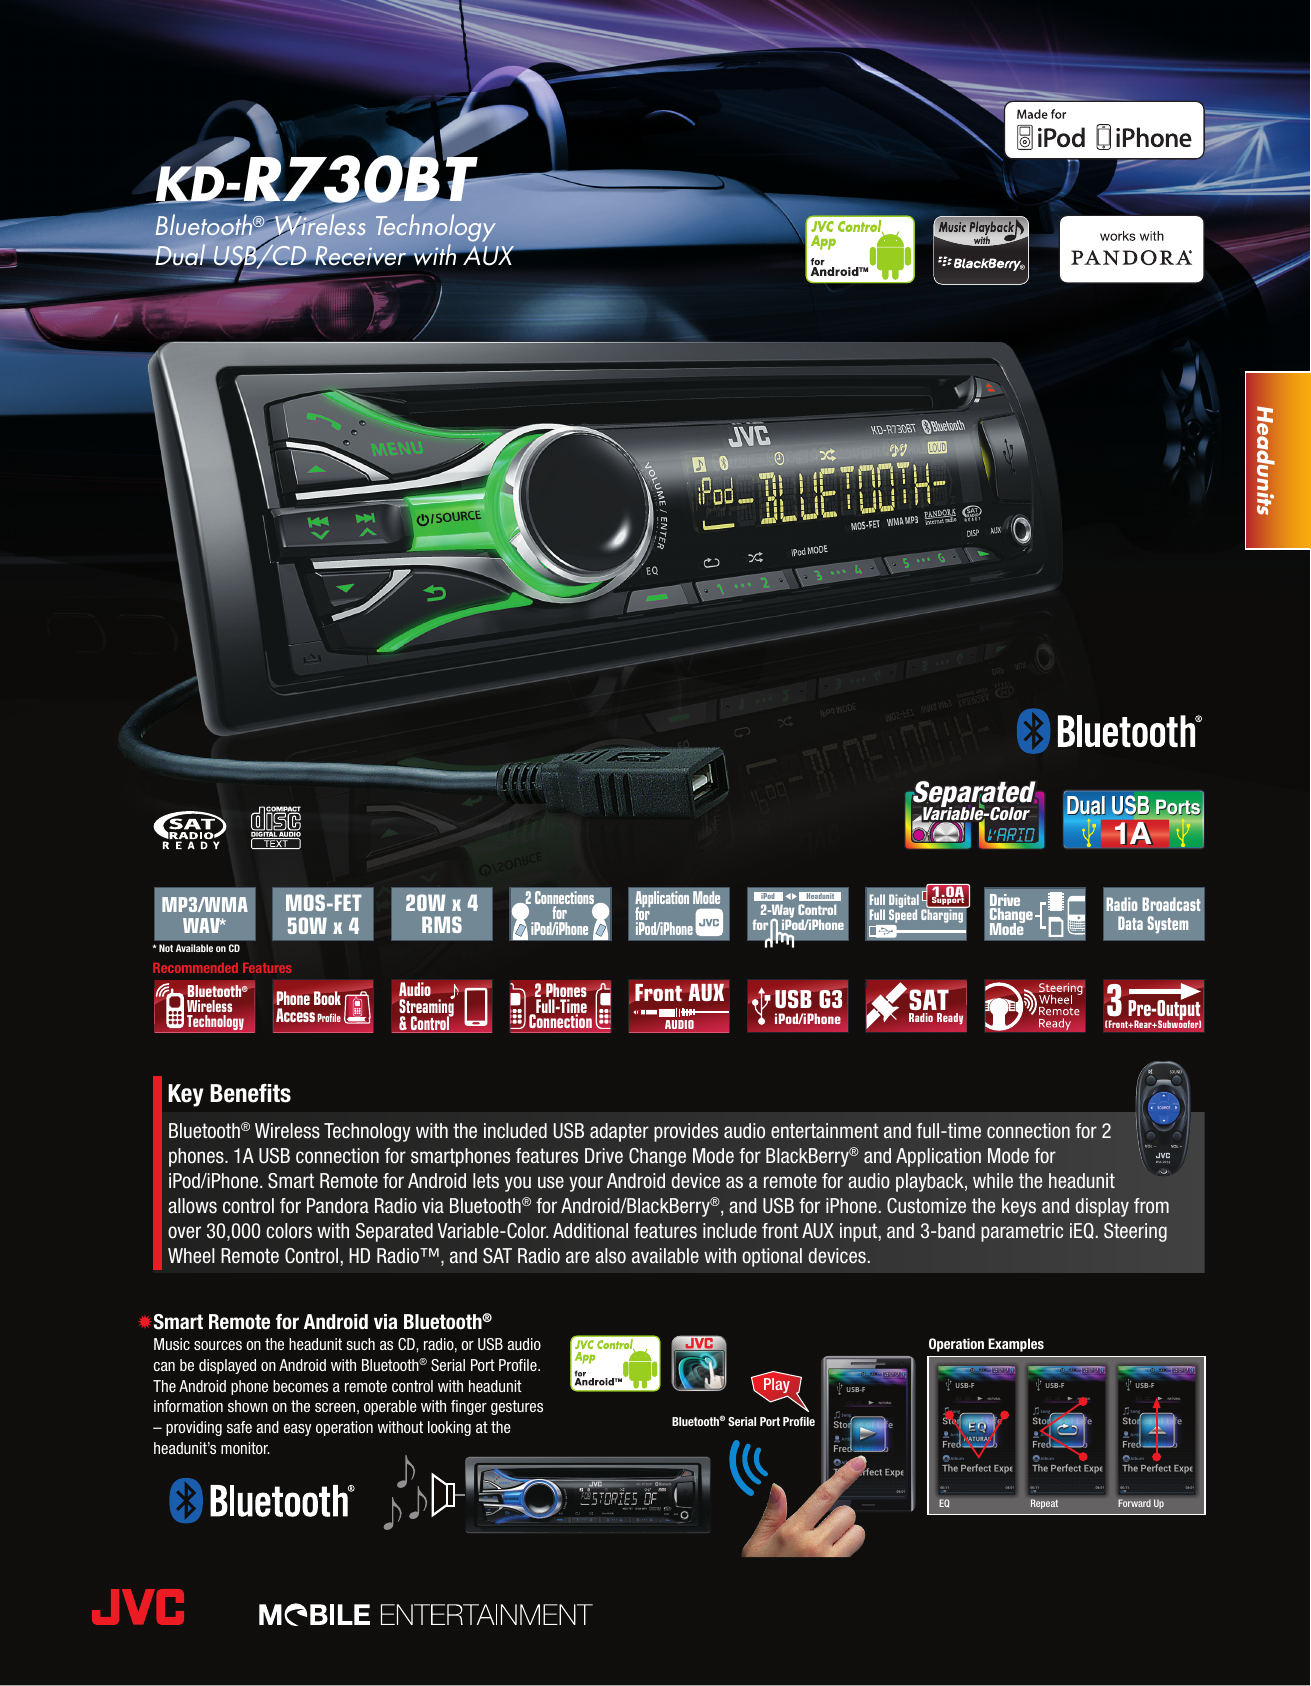 Page 1 of 2 - Jvc Jvc-Car-Stereo-System-Kd-R730Bt-Users-Manual- KD-R730BT_Tech_a  Jvc-car-stereo-system-kd-r730bt-users-manual